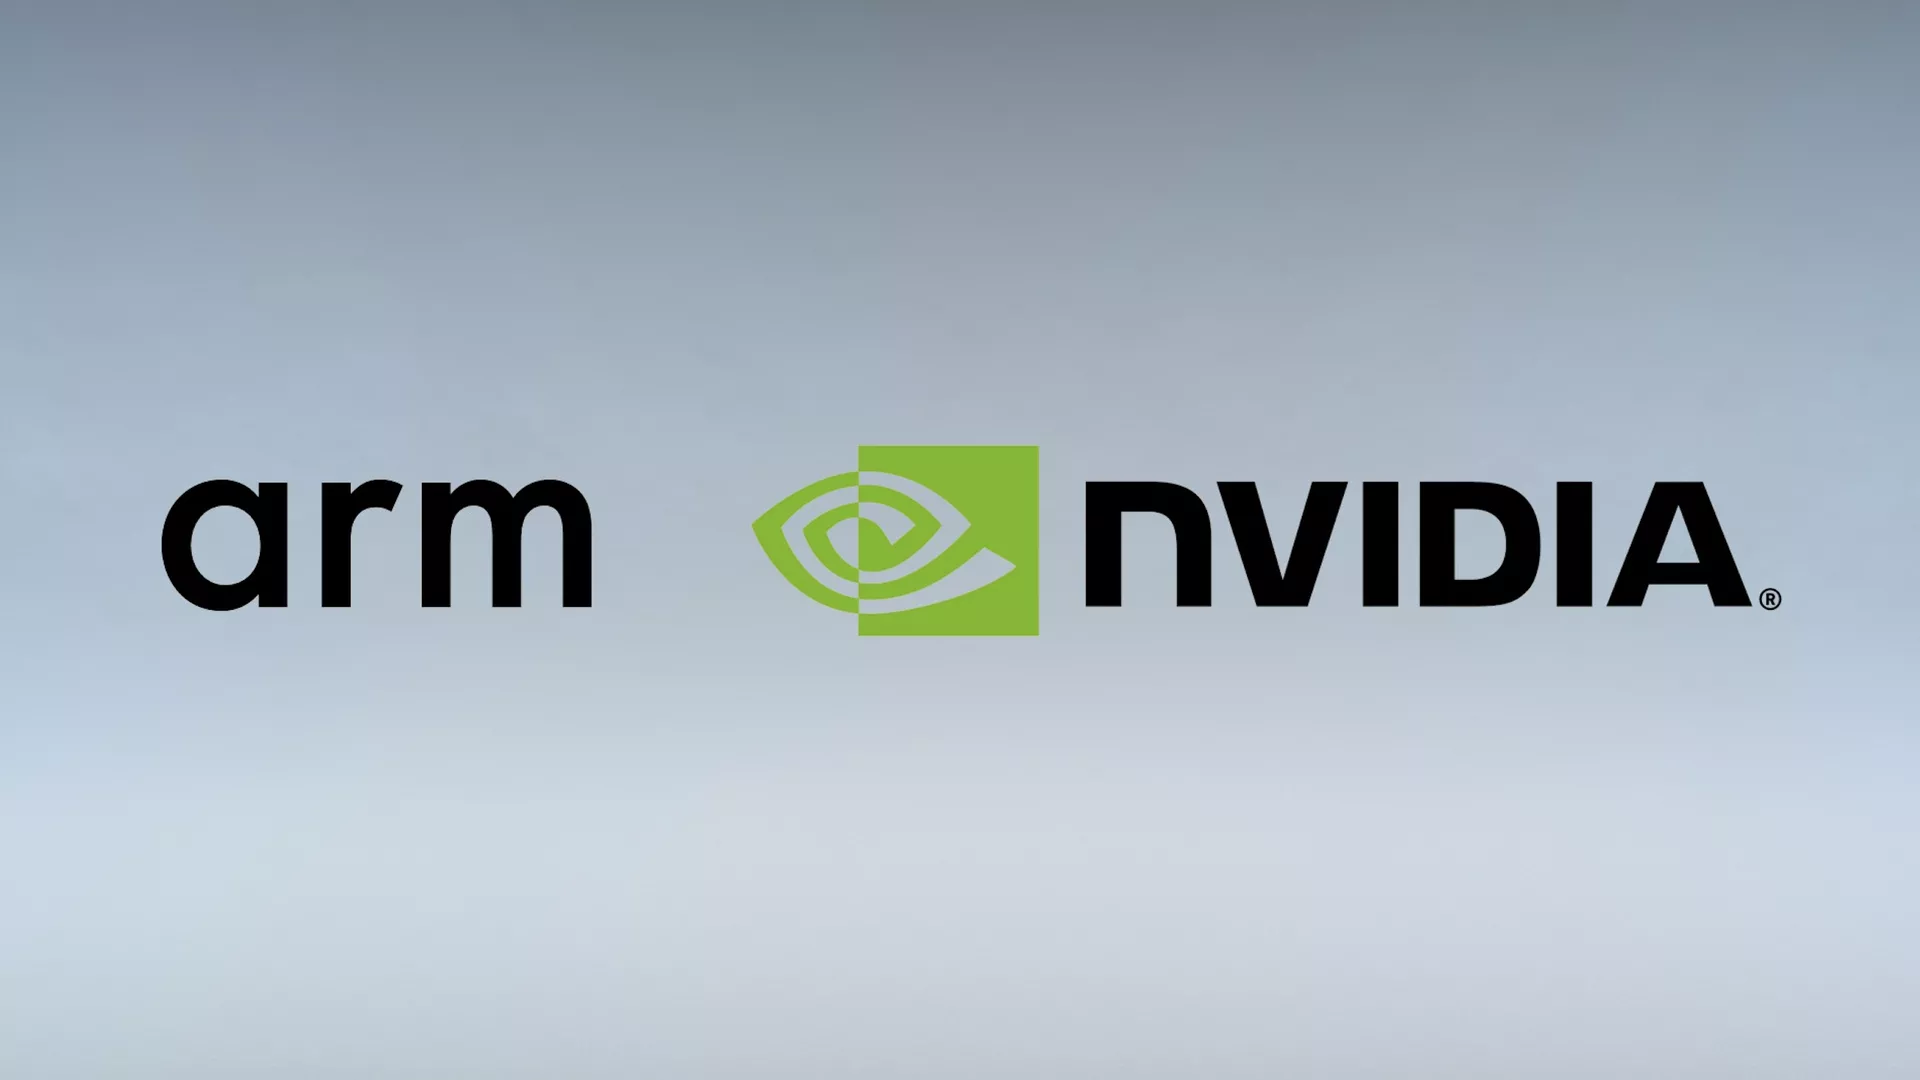 The words "Arm" and "Nvidia" against a grey background with the Nvidia logo in the middle.